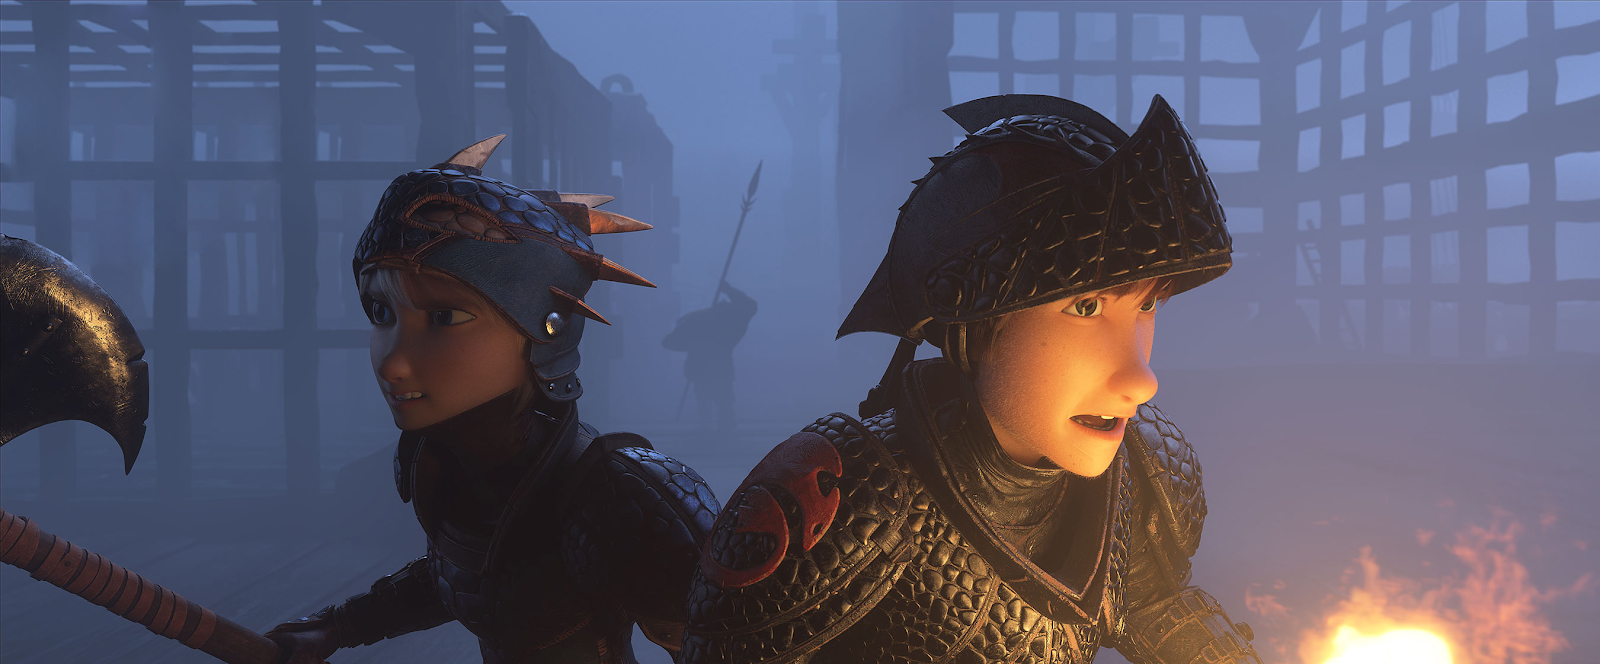 How to Train Your Dragon 3 Review